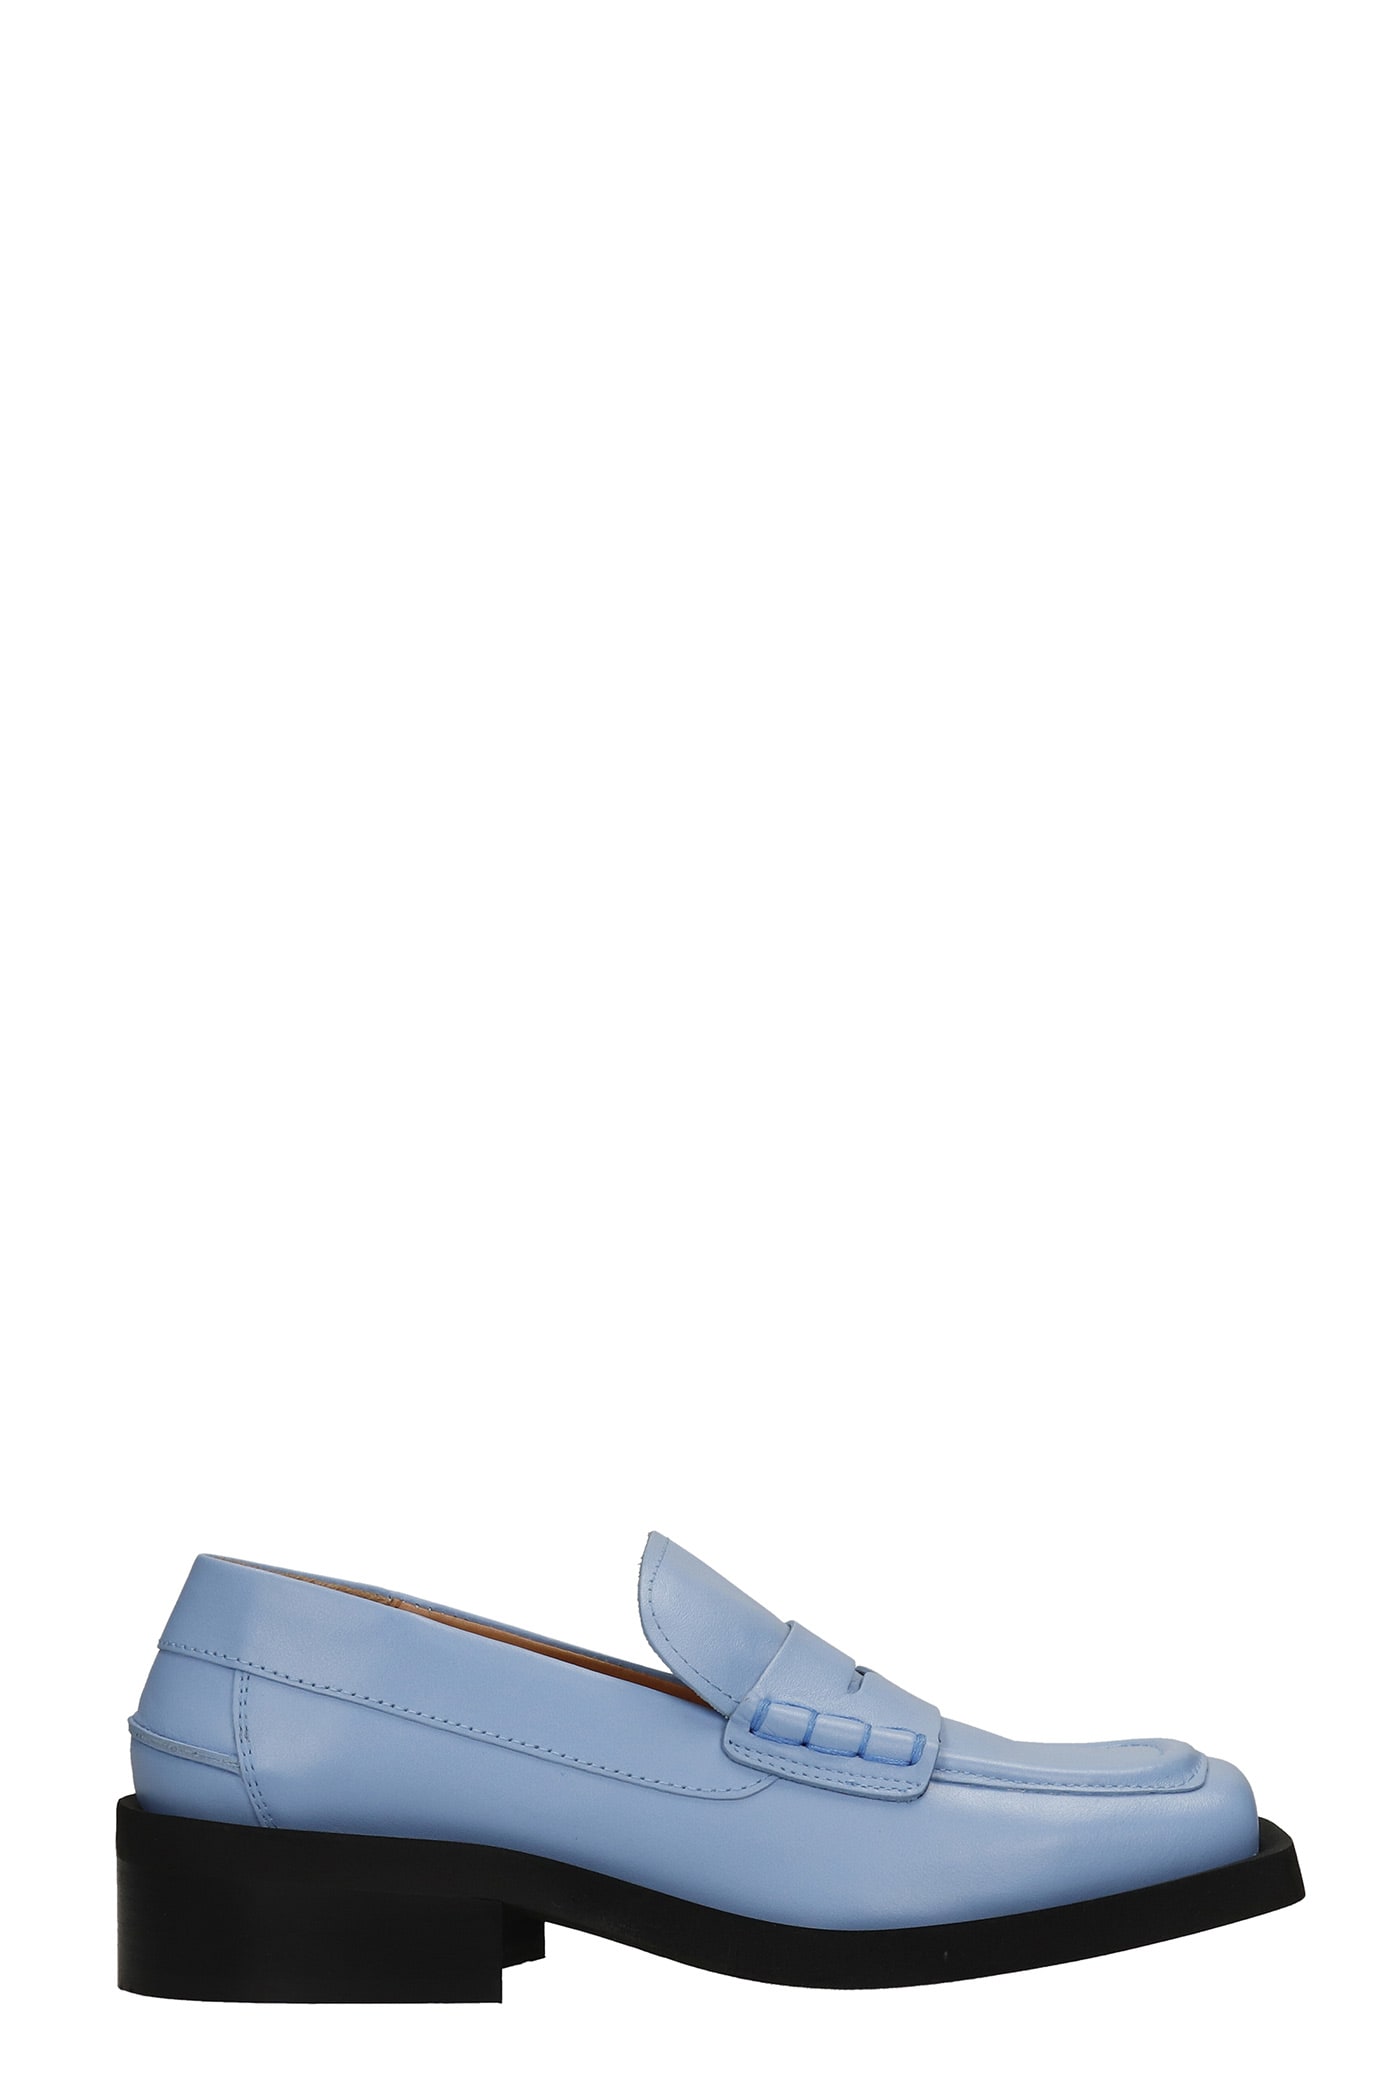 Ganni Loafers In Cyan Leather